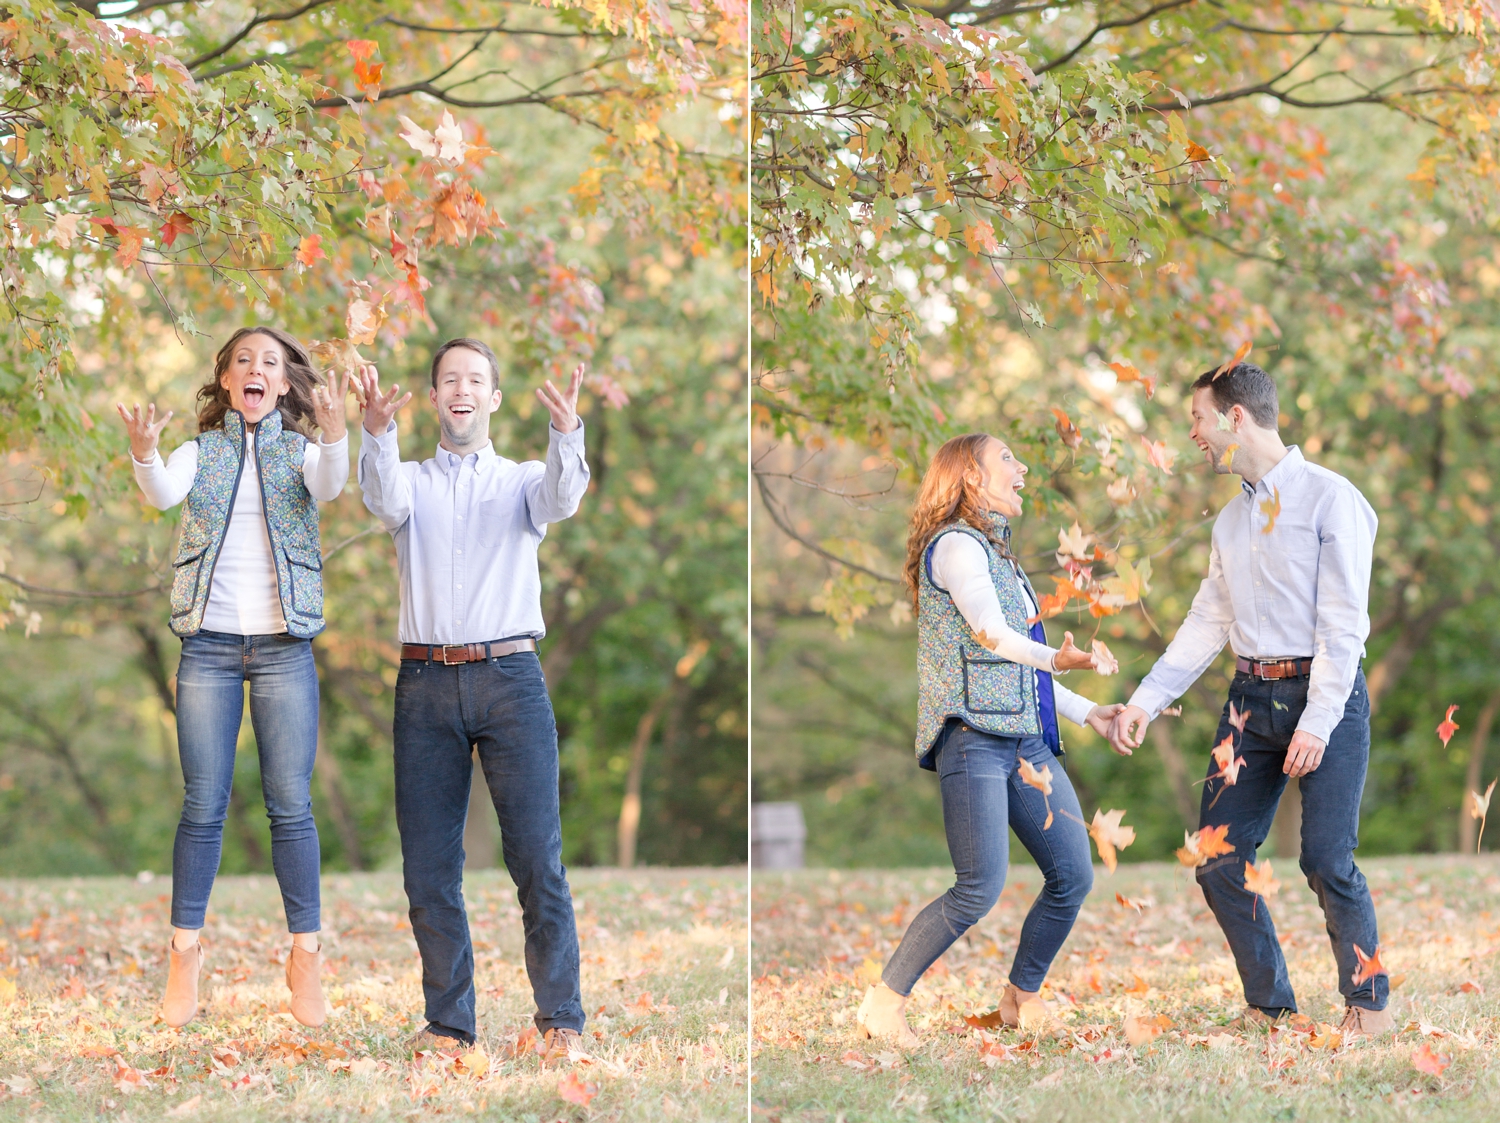  I told them to jump and show their excitement for getting married. I love it!! 